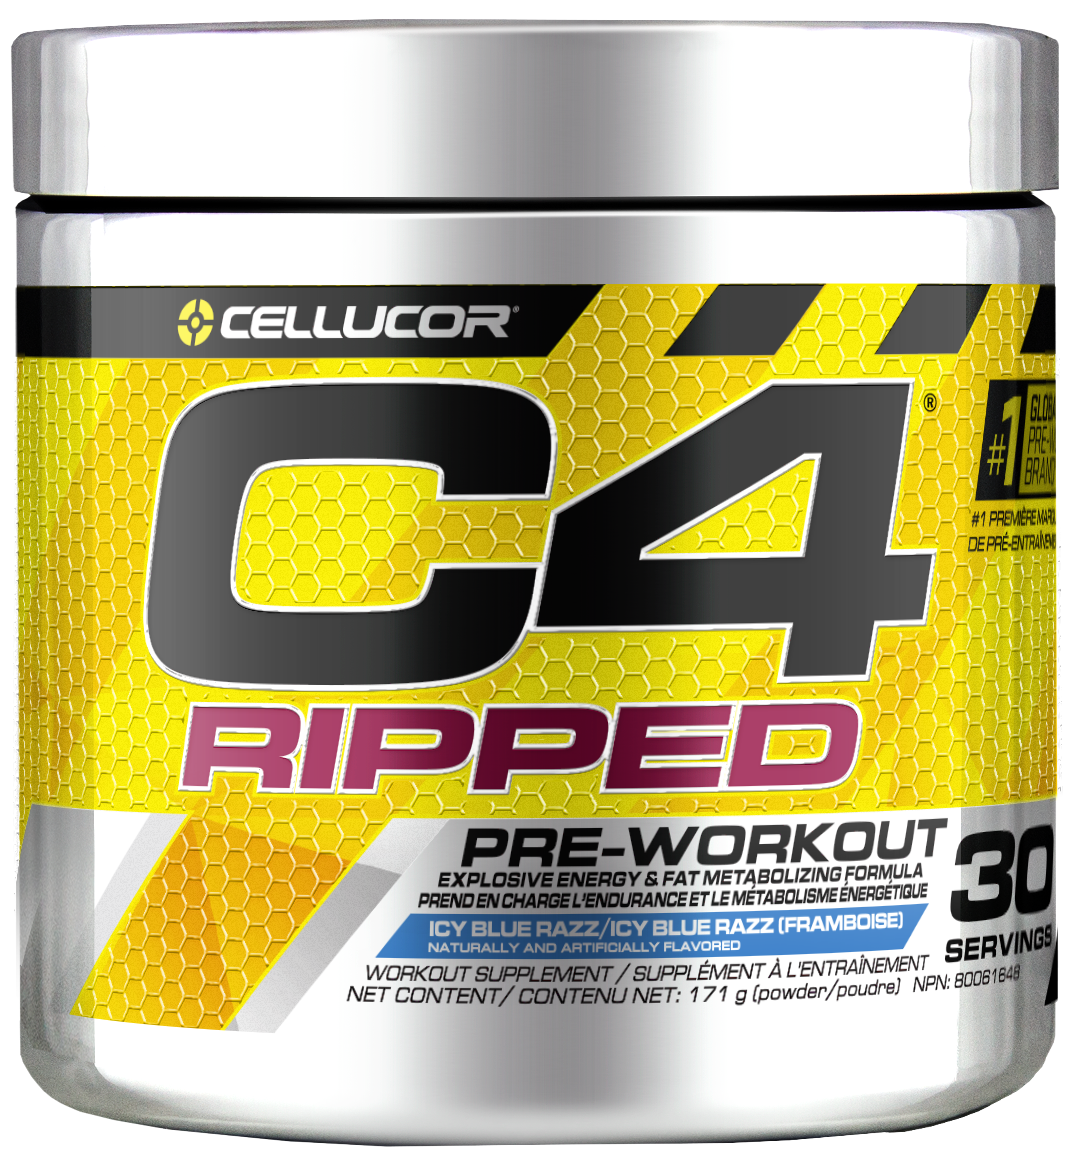 C4 - Pre-Workout Ripped 30 portions